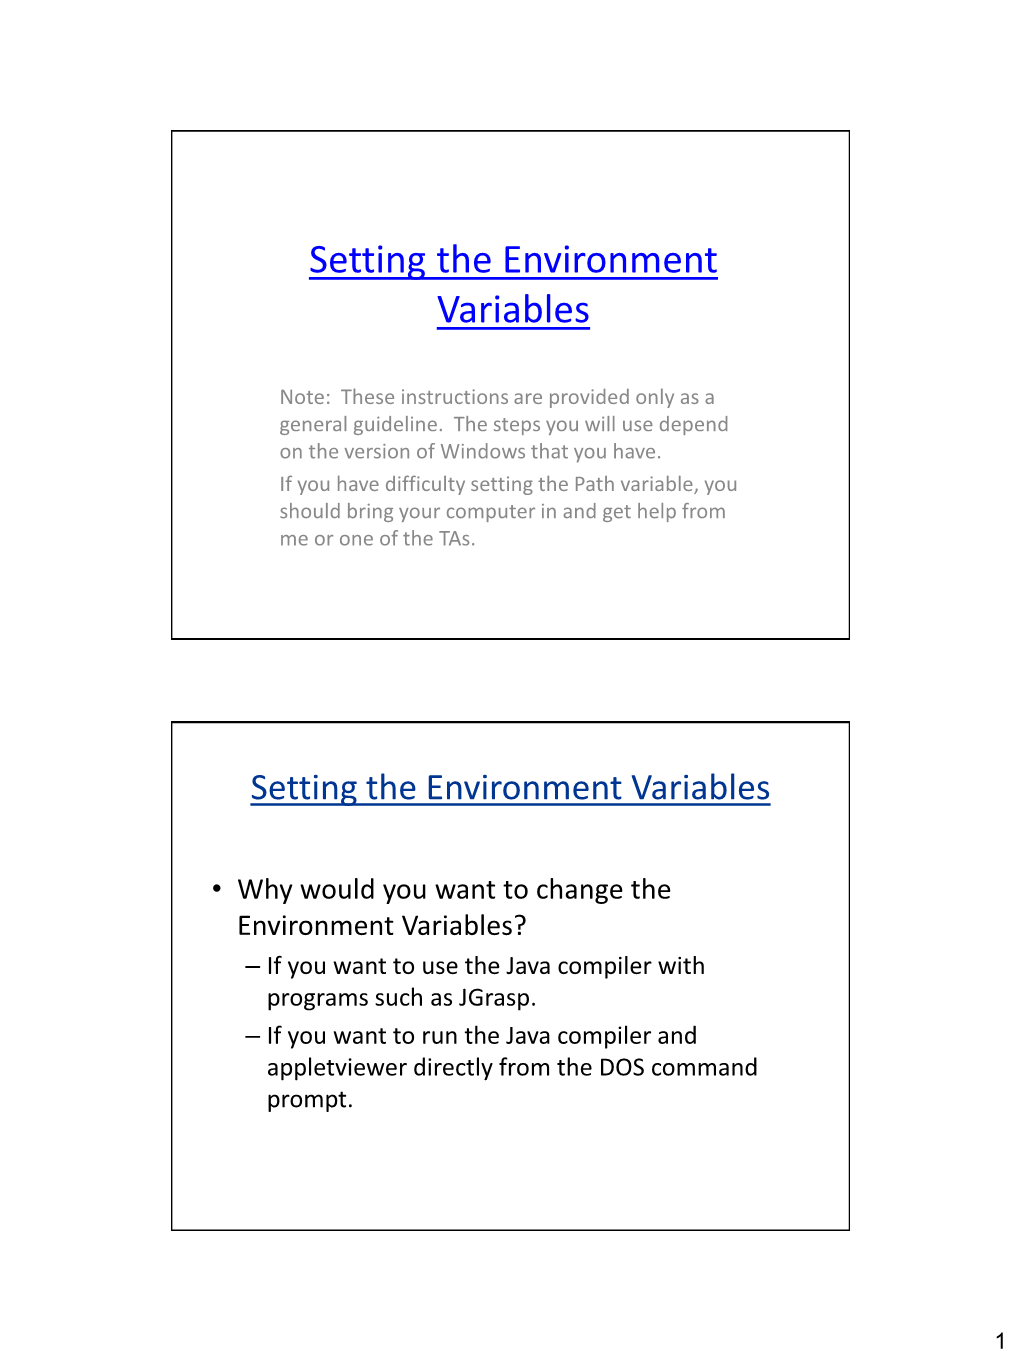 Setting the Environment Variables